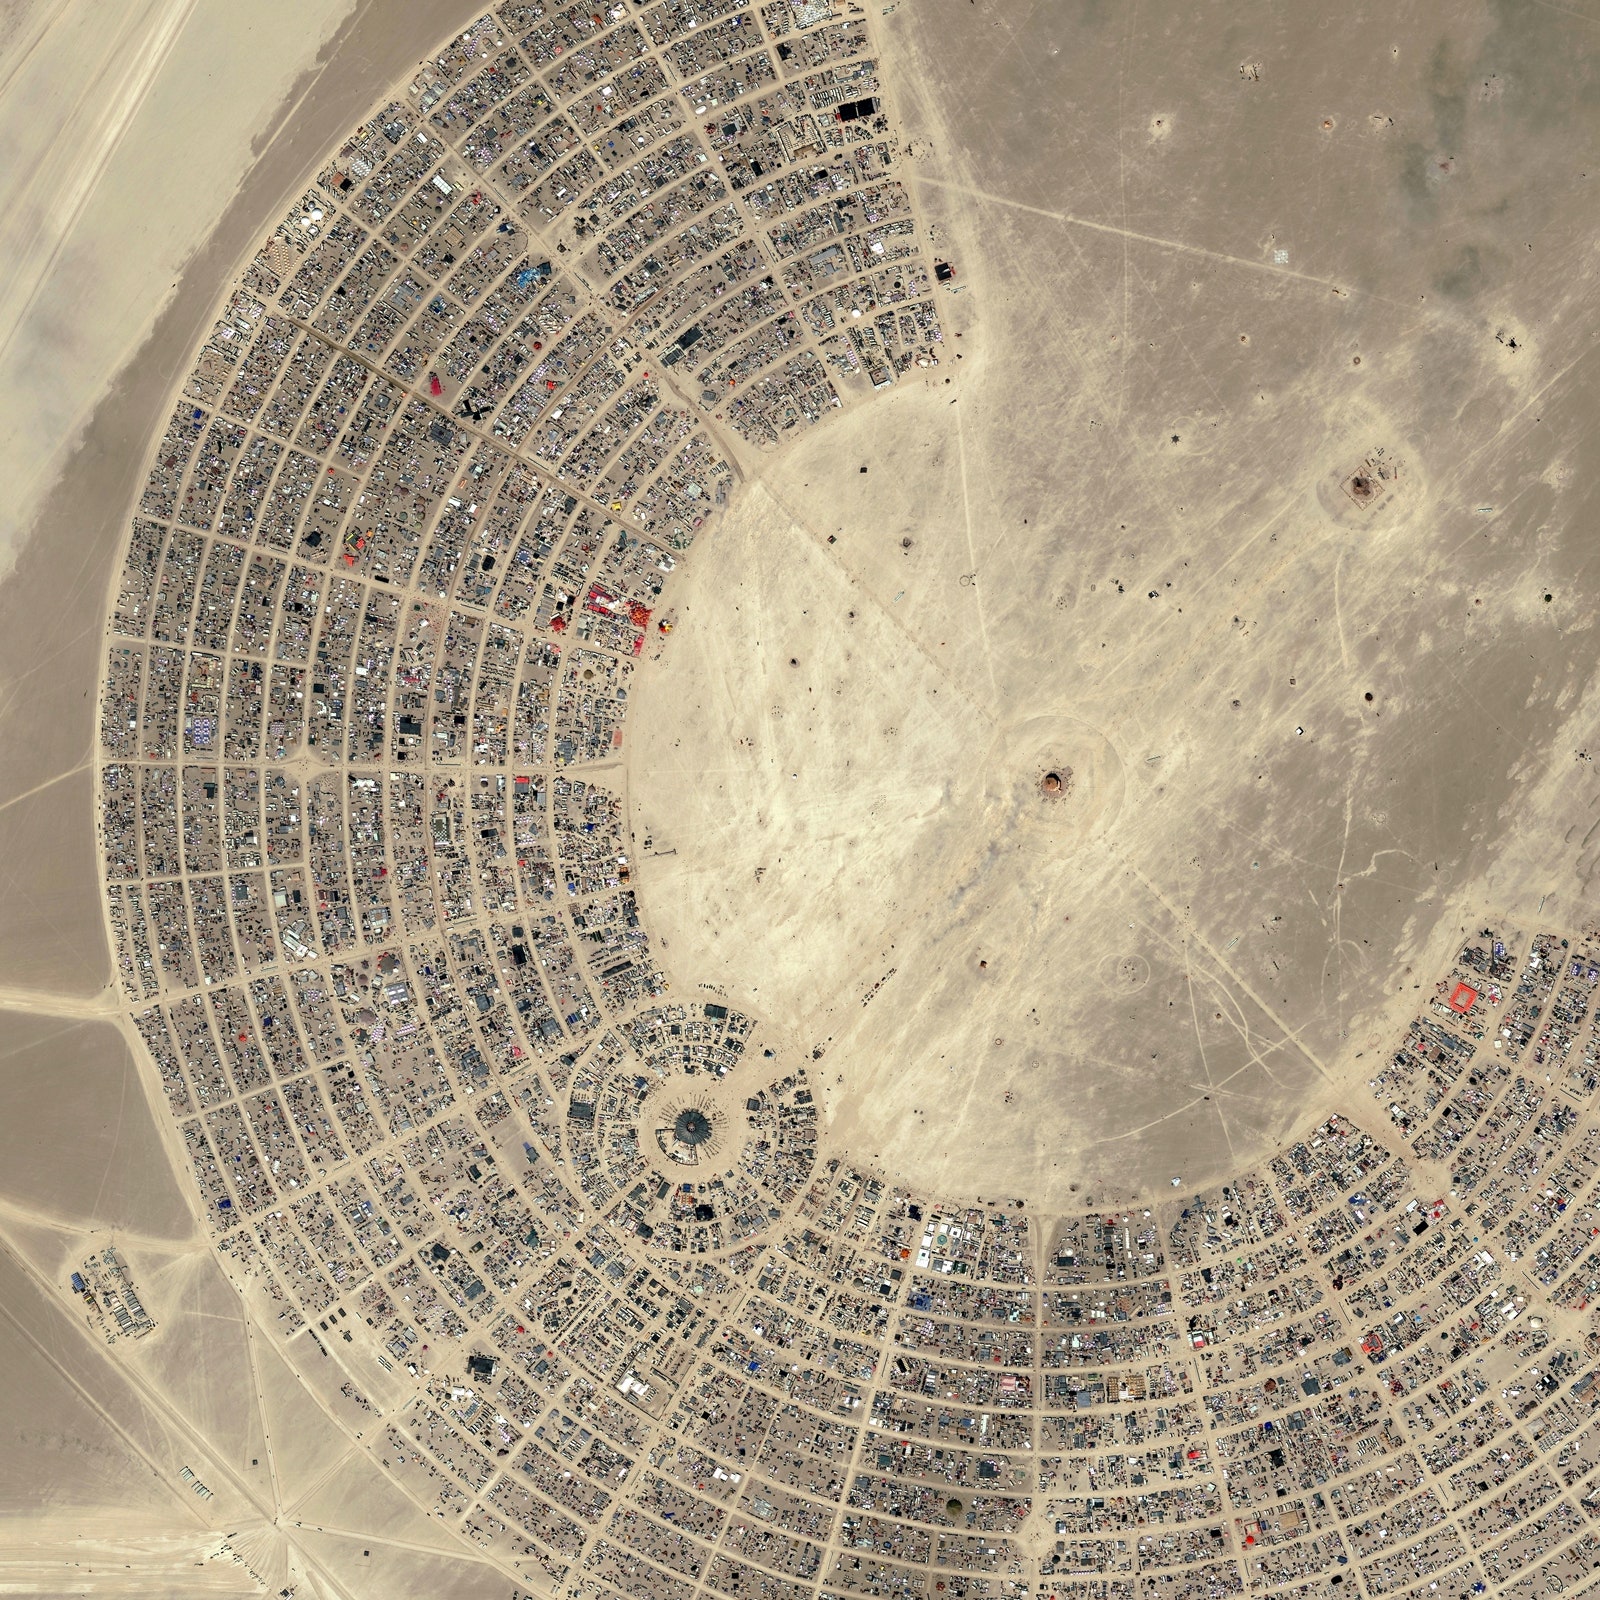 Aerial view of a tents arranged in a geometric shape in a desert landscape during Burning Man Festival